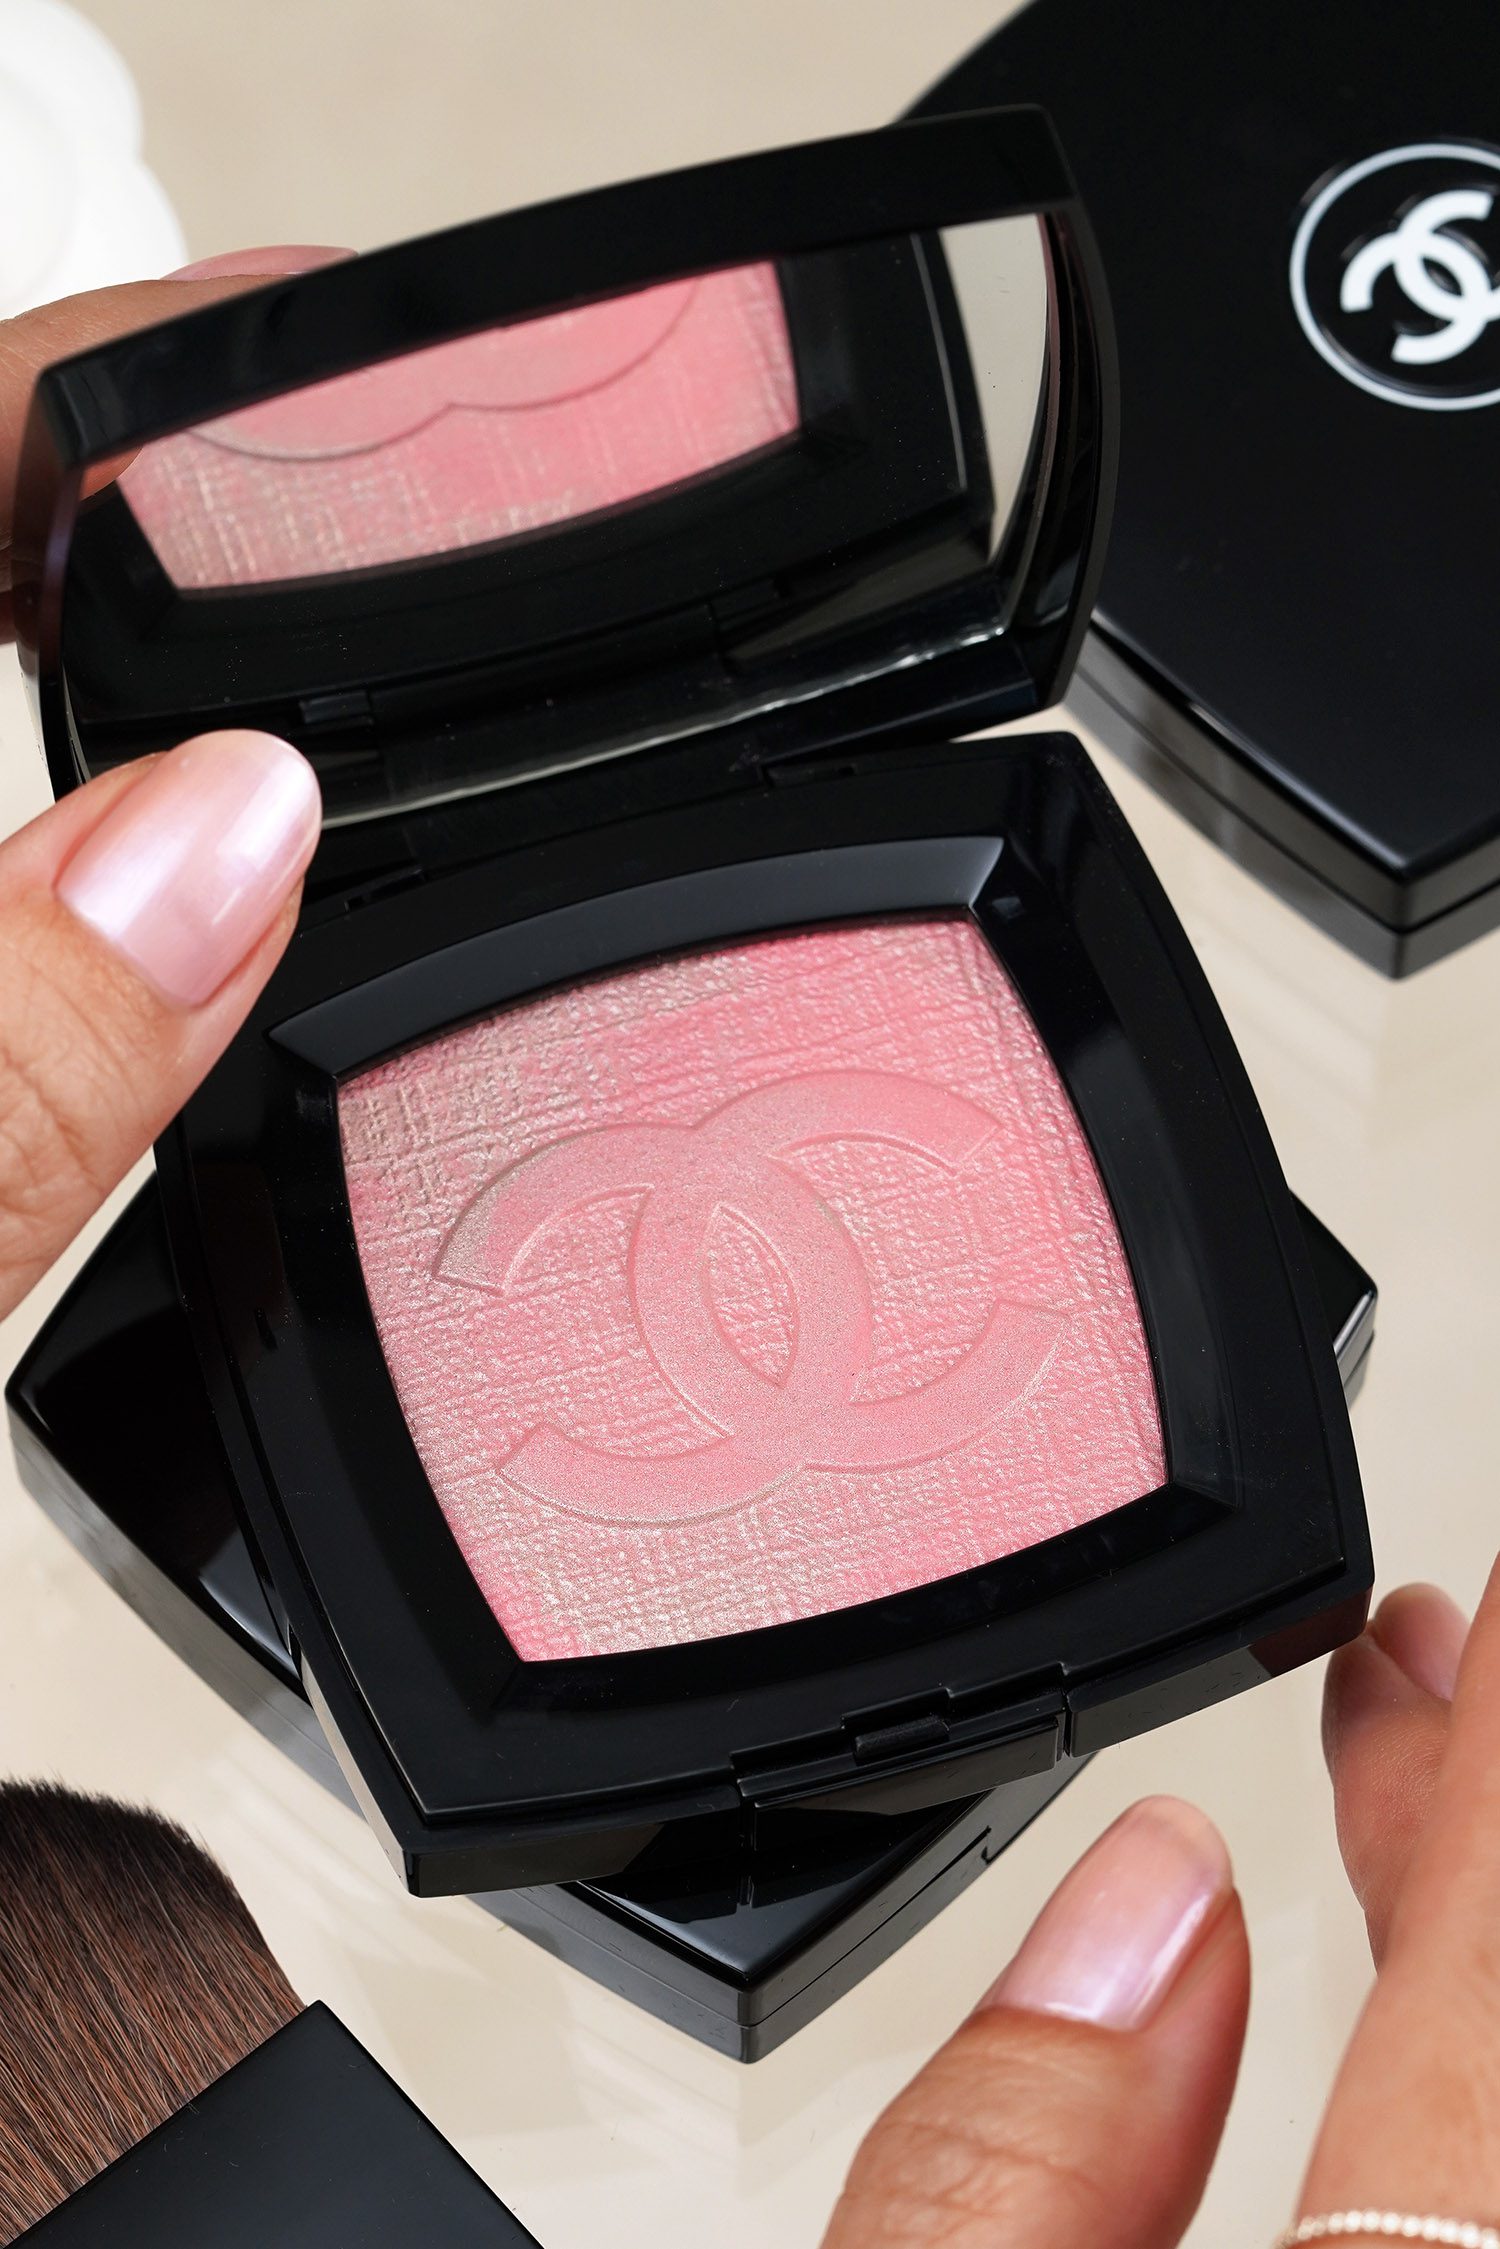 REVIEW: Le Blush Creme de Chanel – Chanel Cream Blush in 63 “Revelation”, Daily Musings